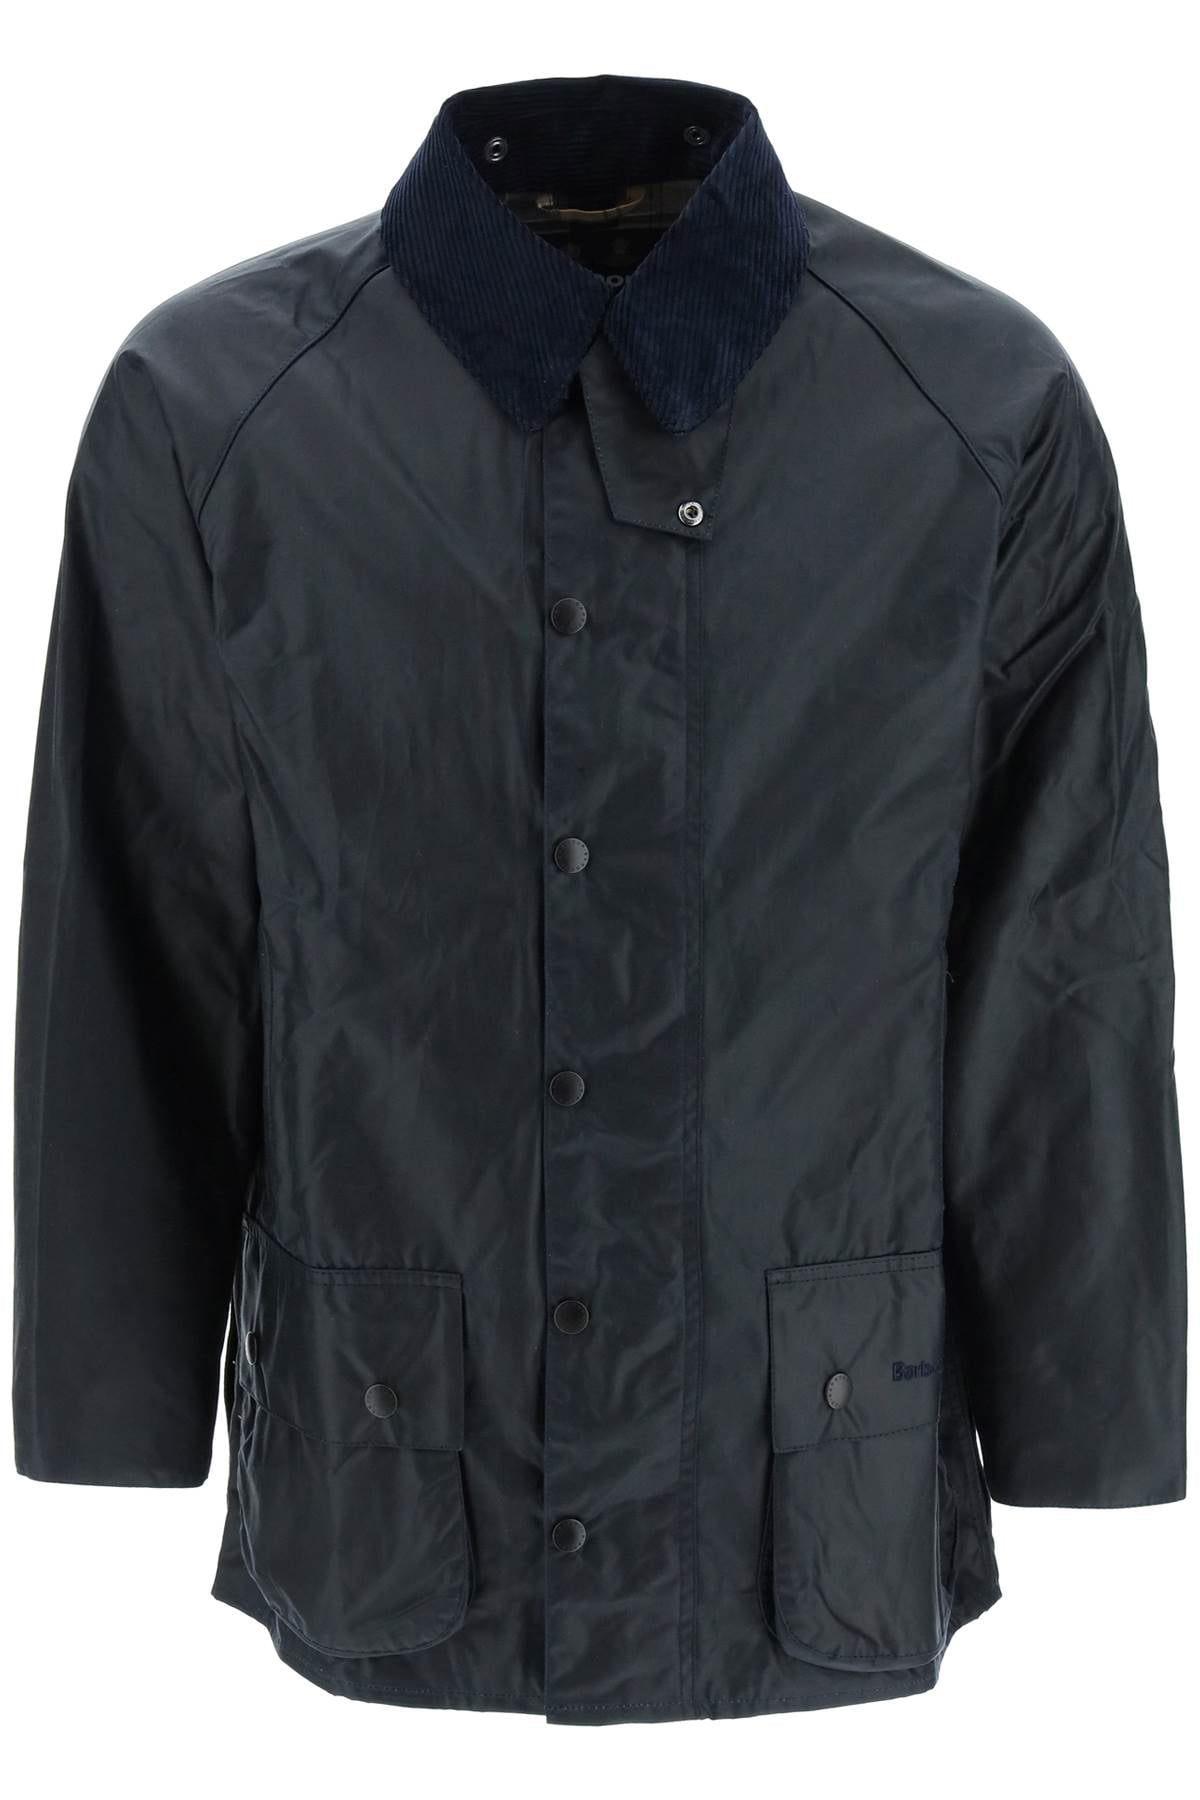 Beaufort Wax Jacket Gordy Sons Outfitters | lupon.gov.ph